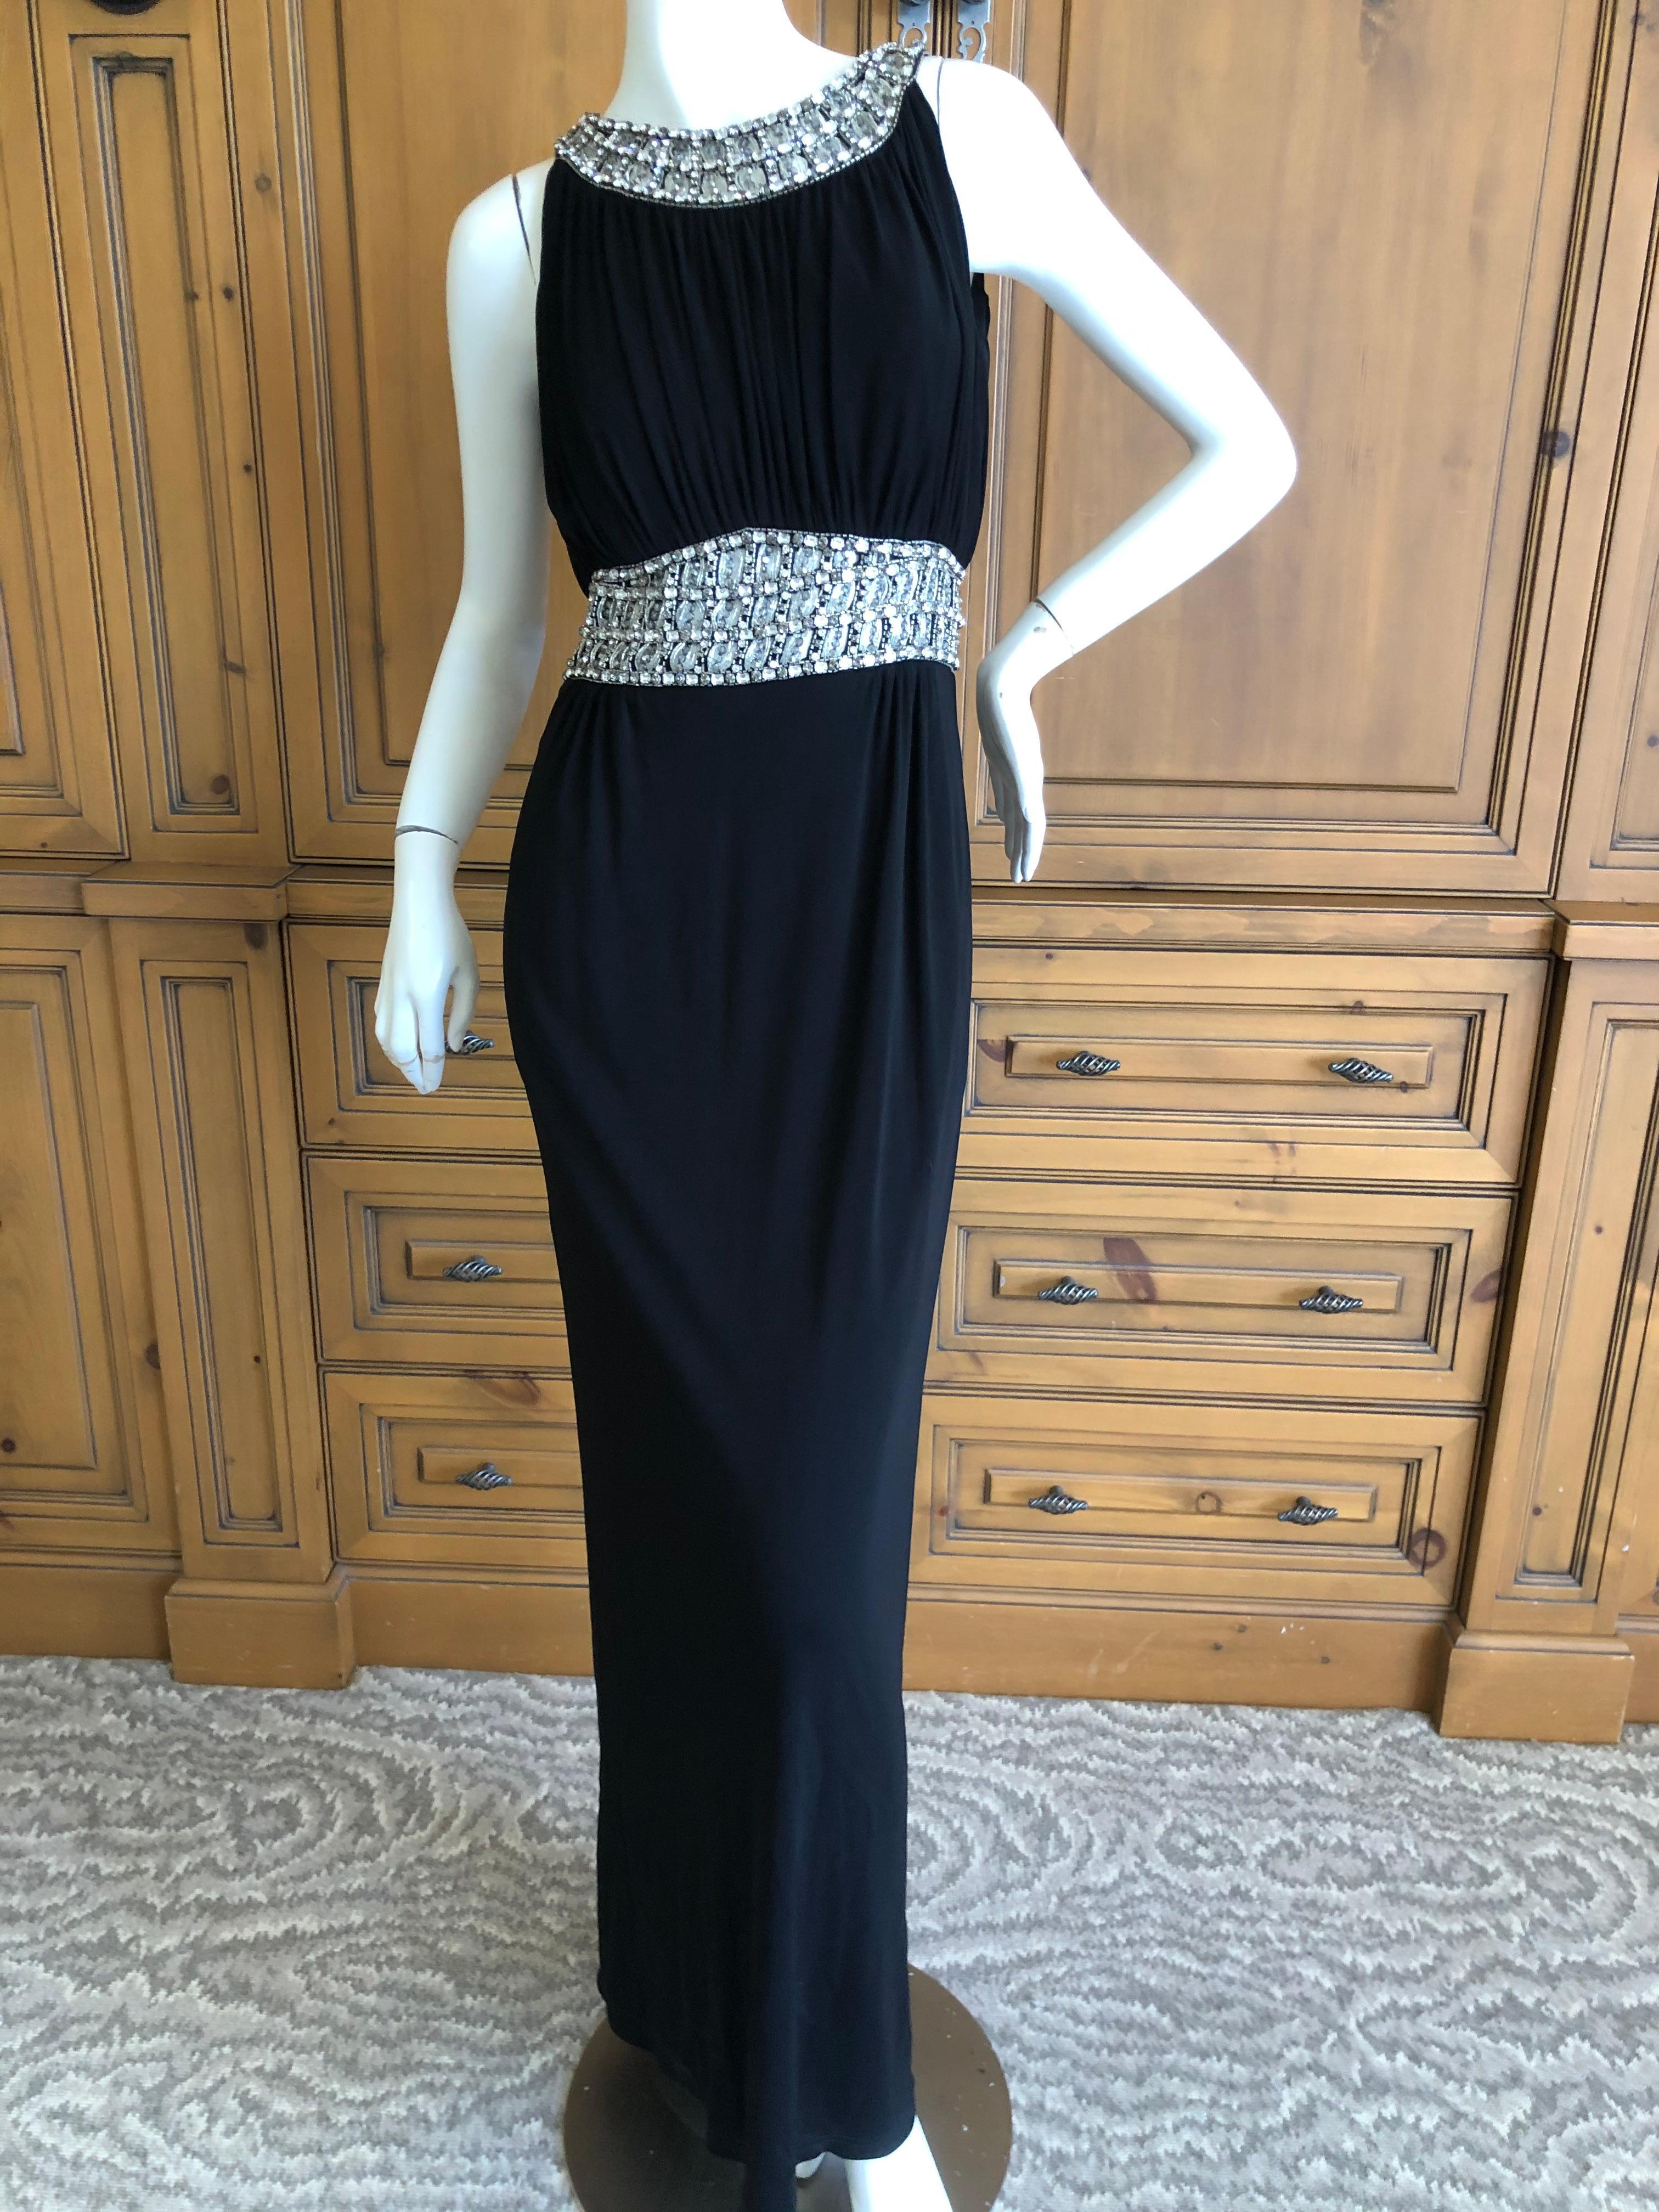 Azzaro Pleated Black Vintage Evening Dress with Jeweled Collar and Belt For Sale 8